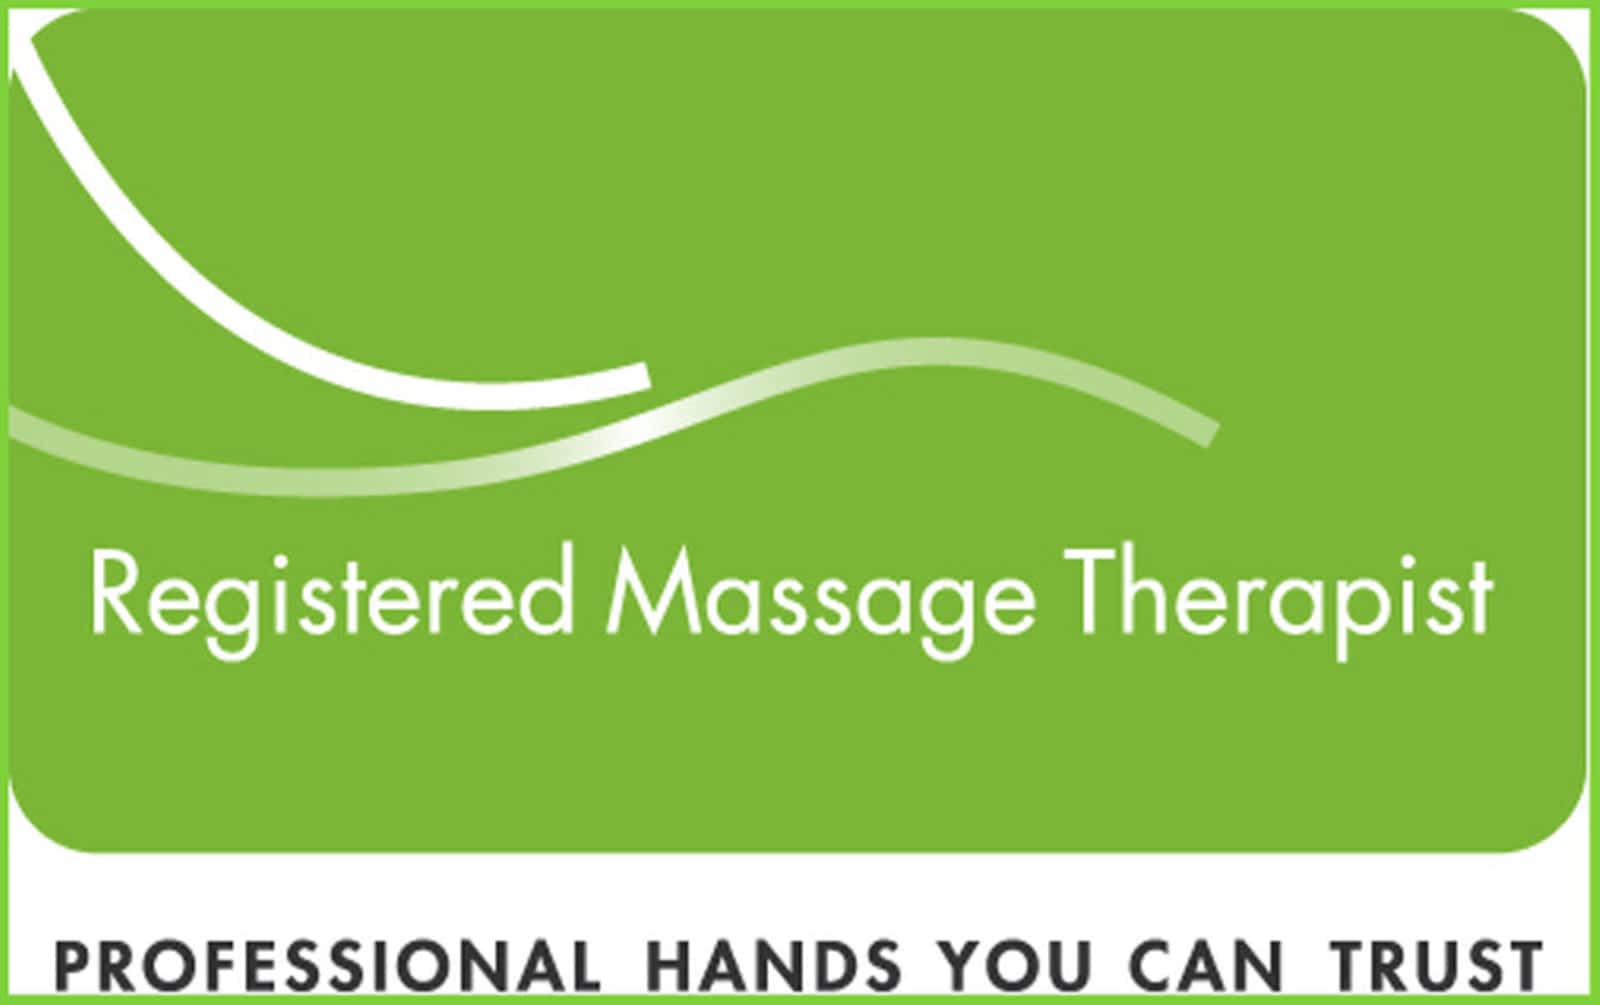 Why Use A RMT Registered Massage Therapist